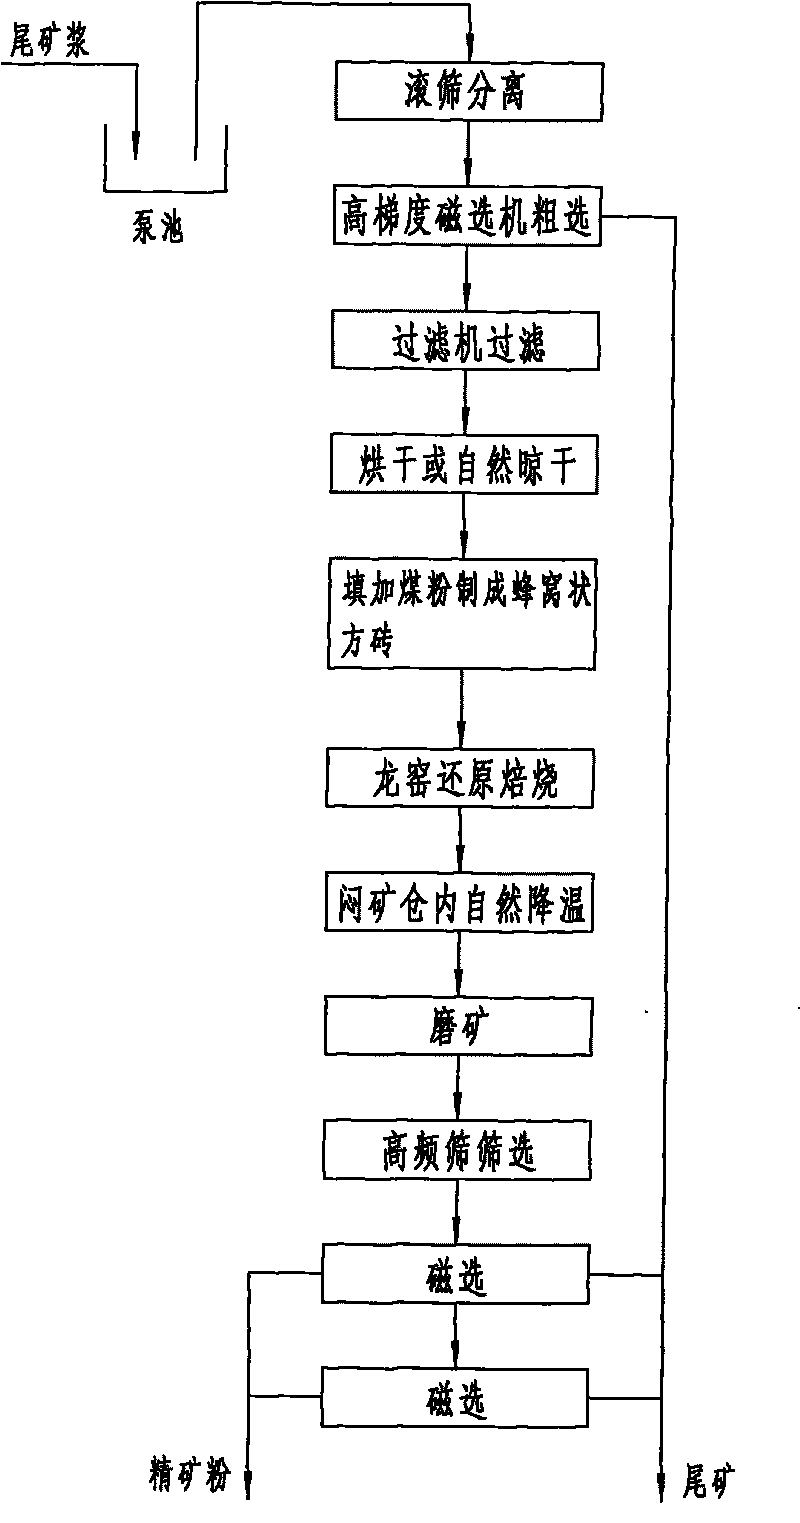 Process for roasting and restoring tailings with weak-intensity magnetism by dragon kiln